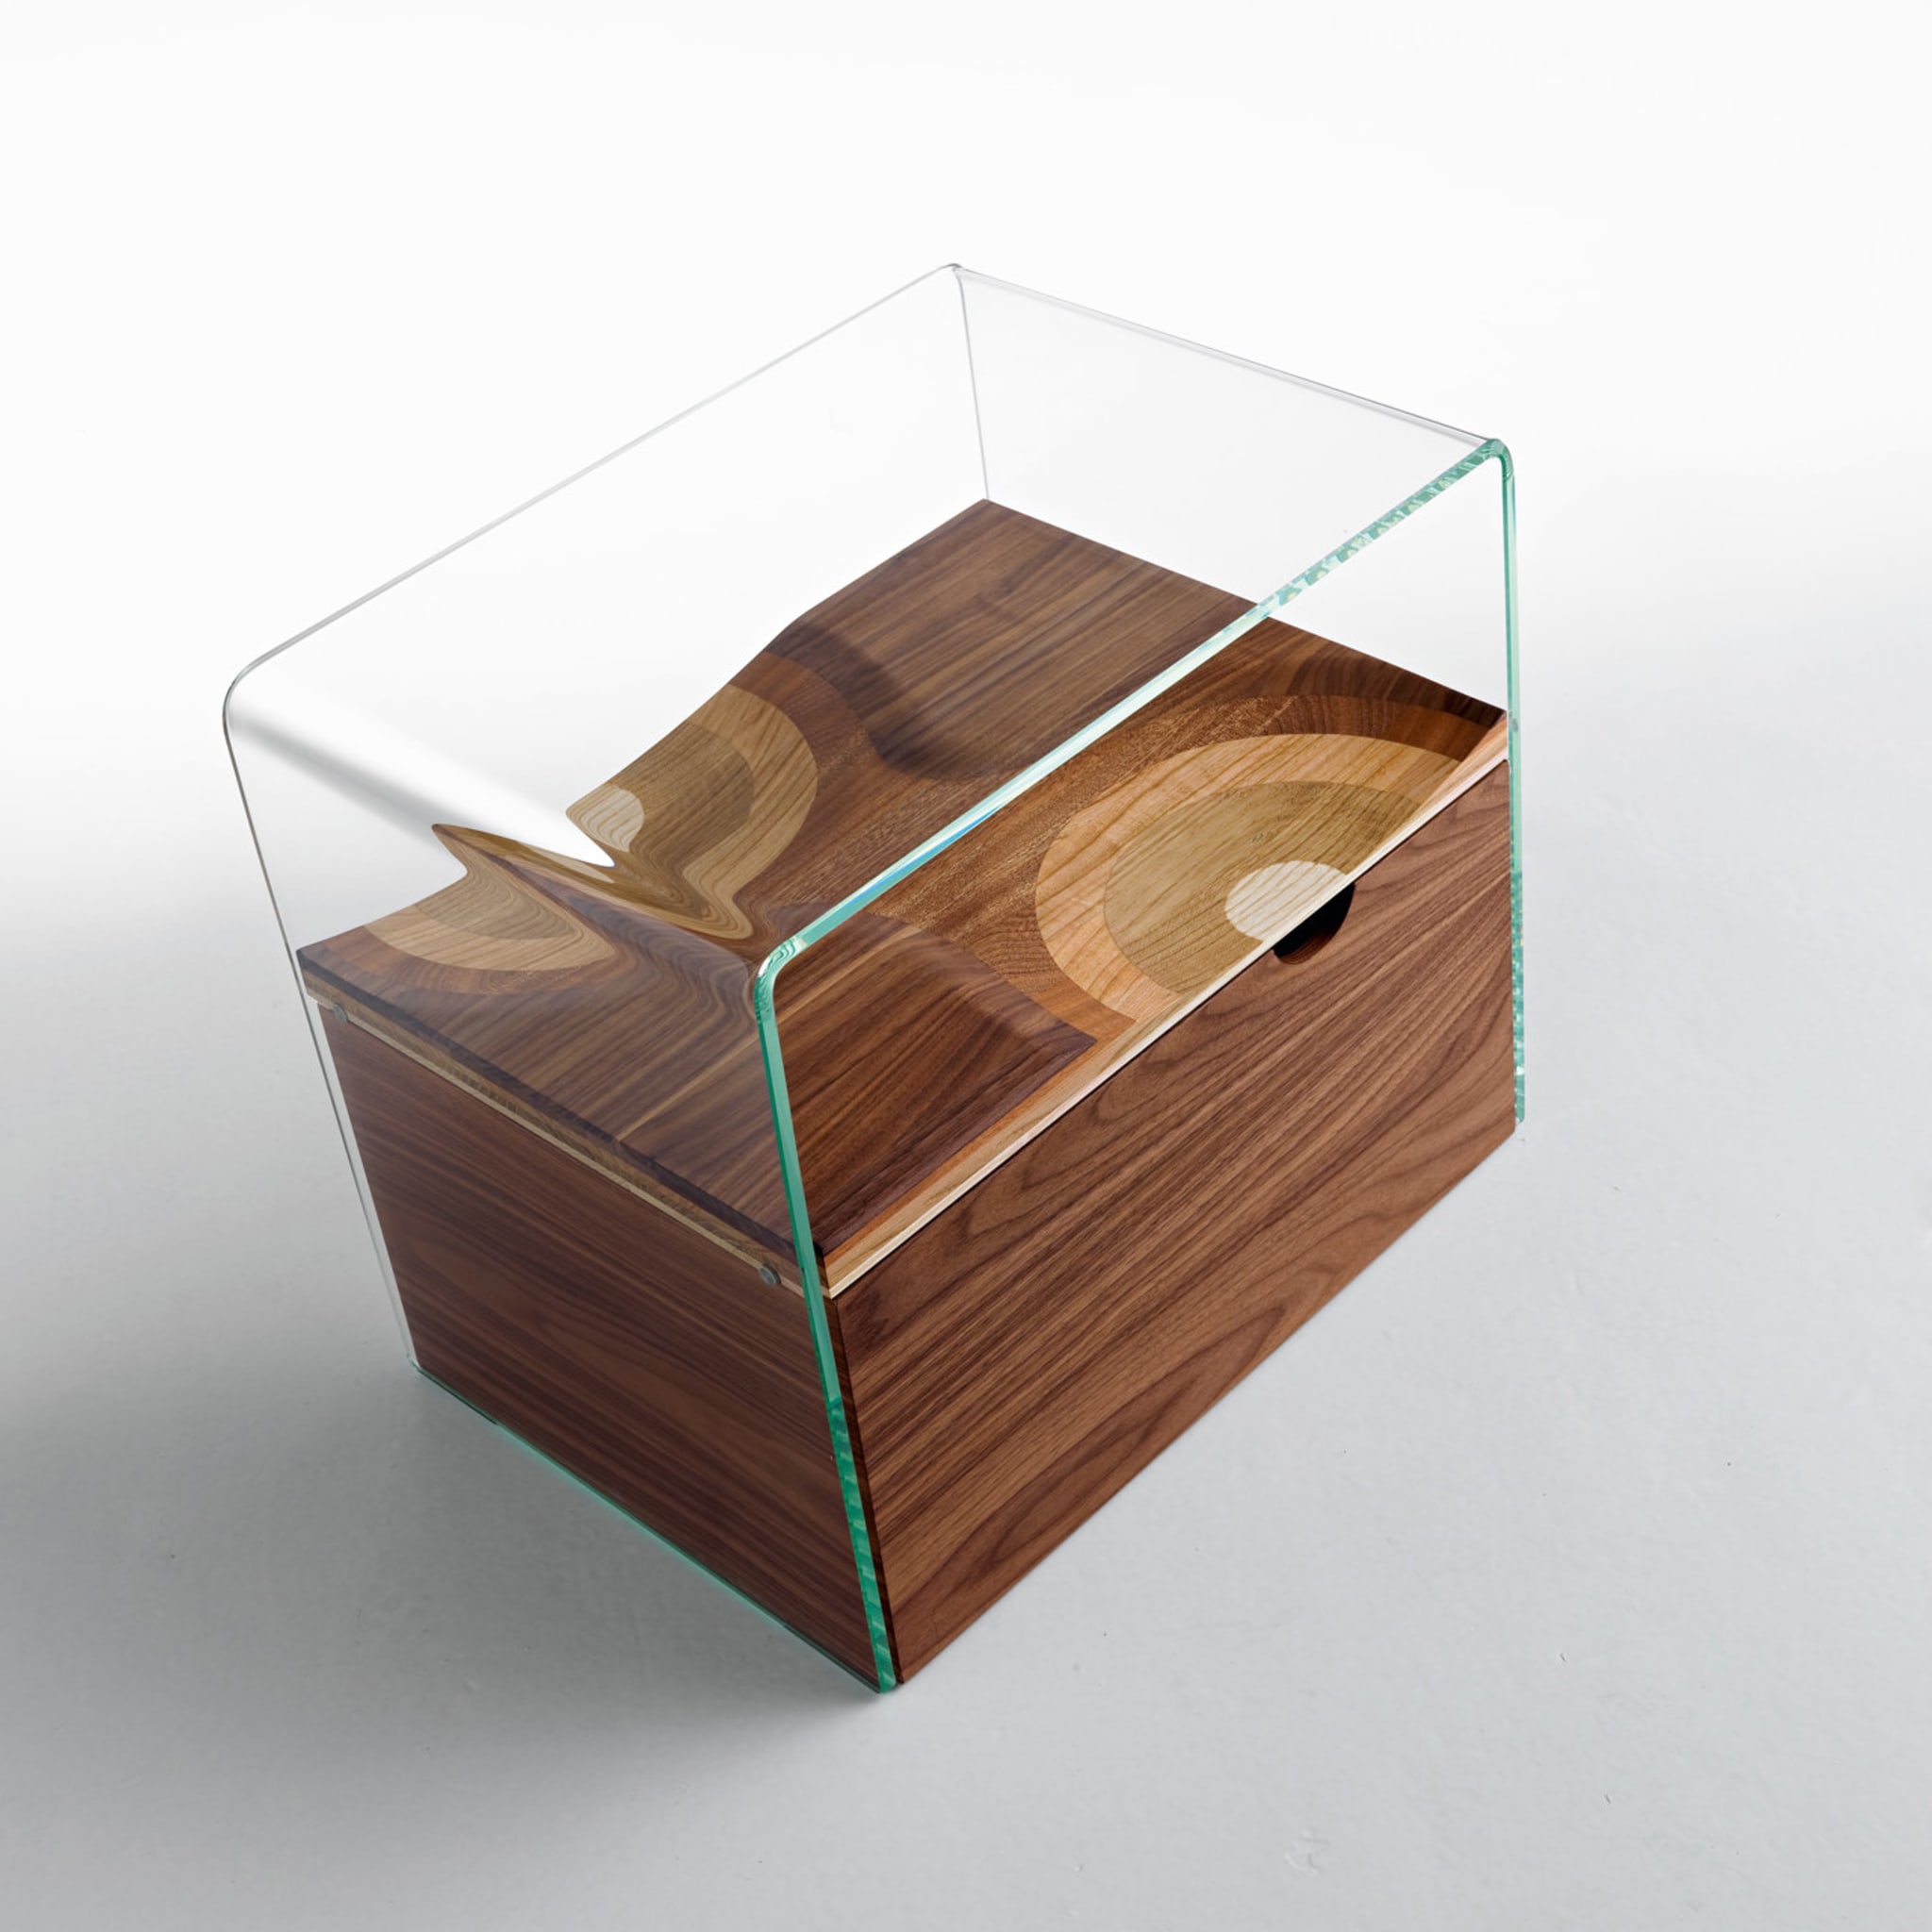 Bifronte Nightstand with Drawer by Toyo Ito - Alternative view 1